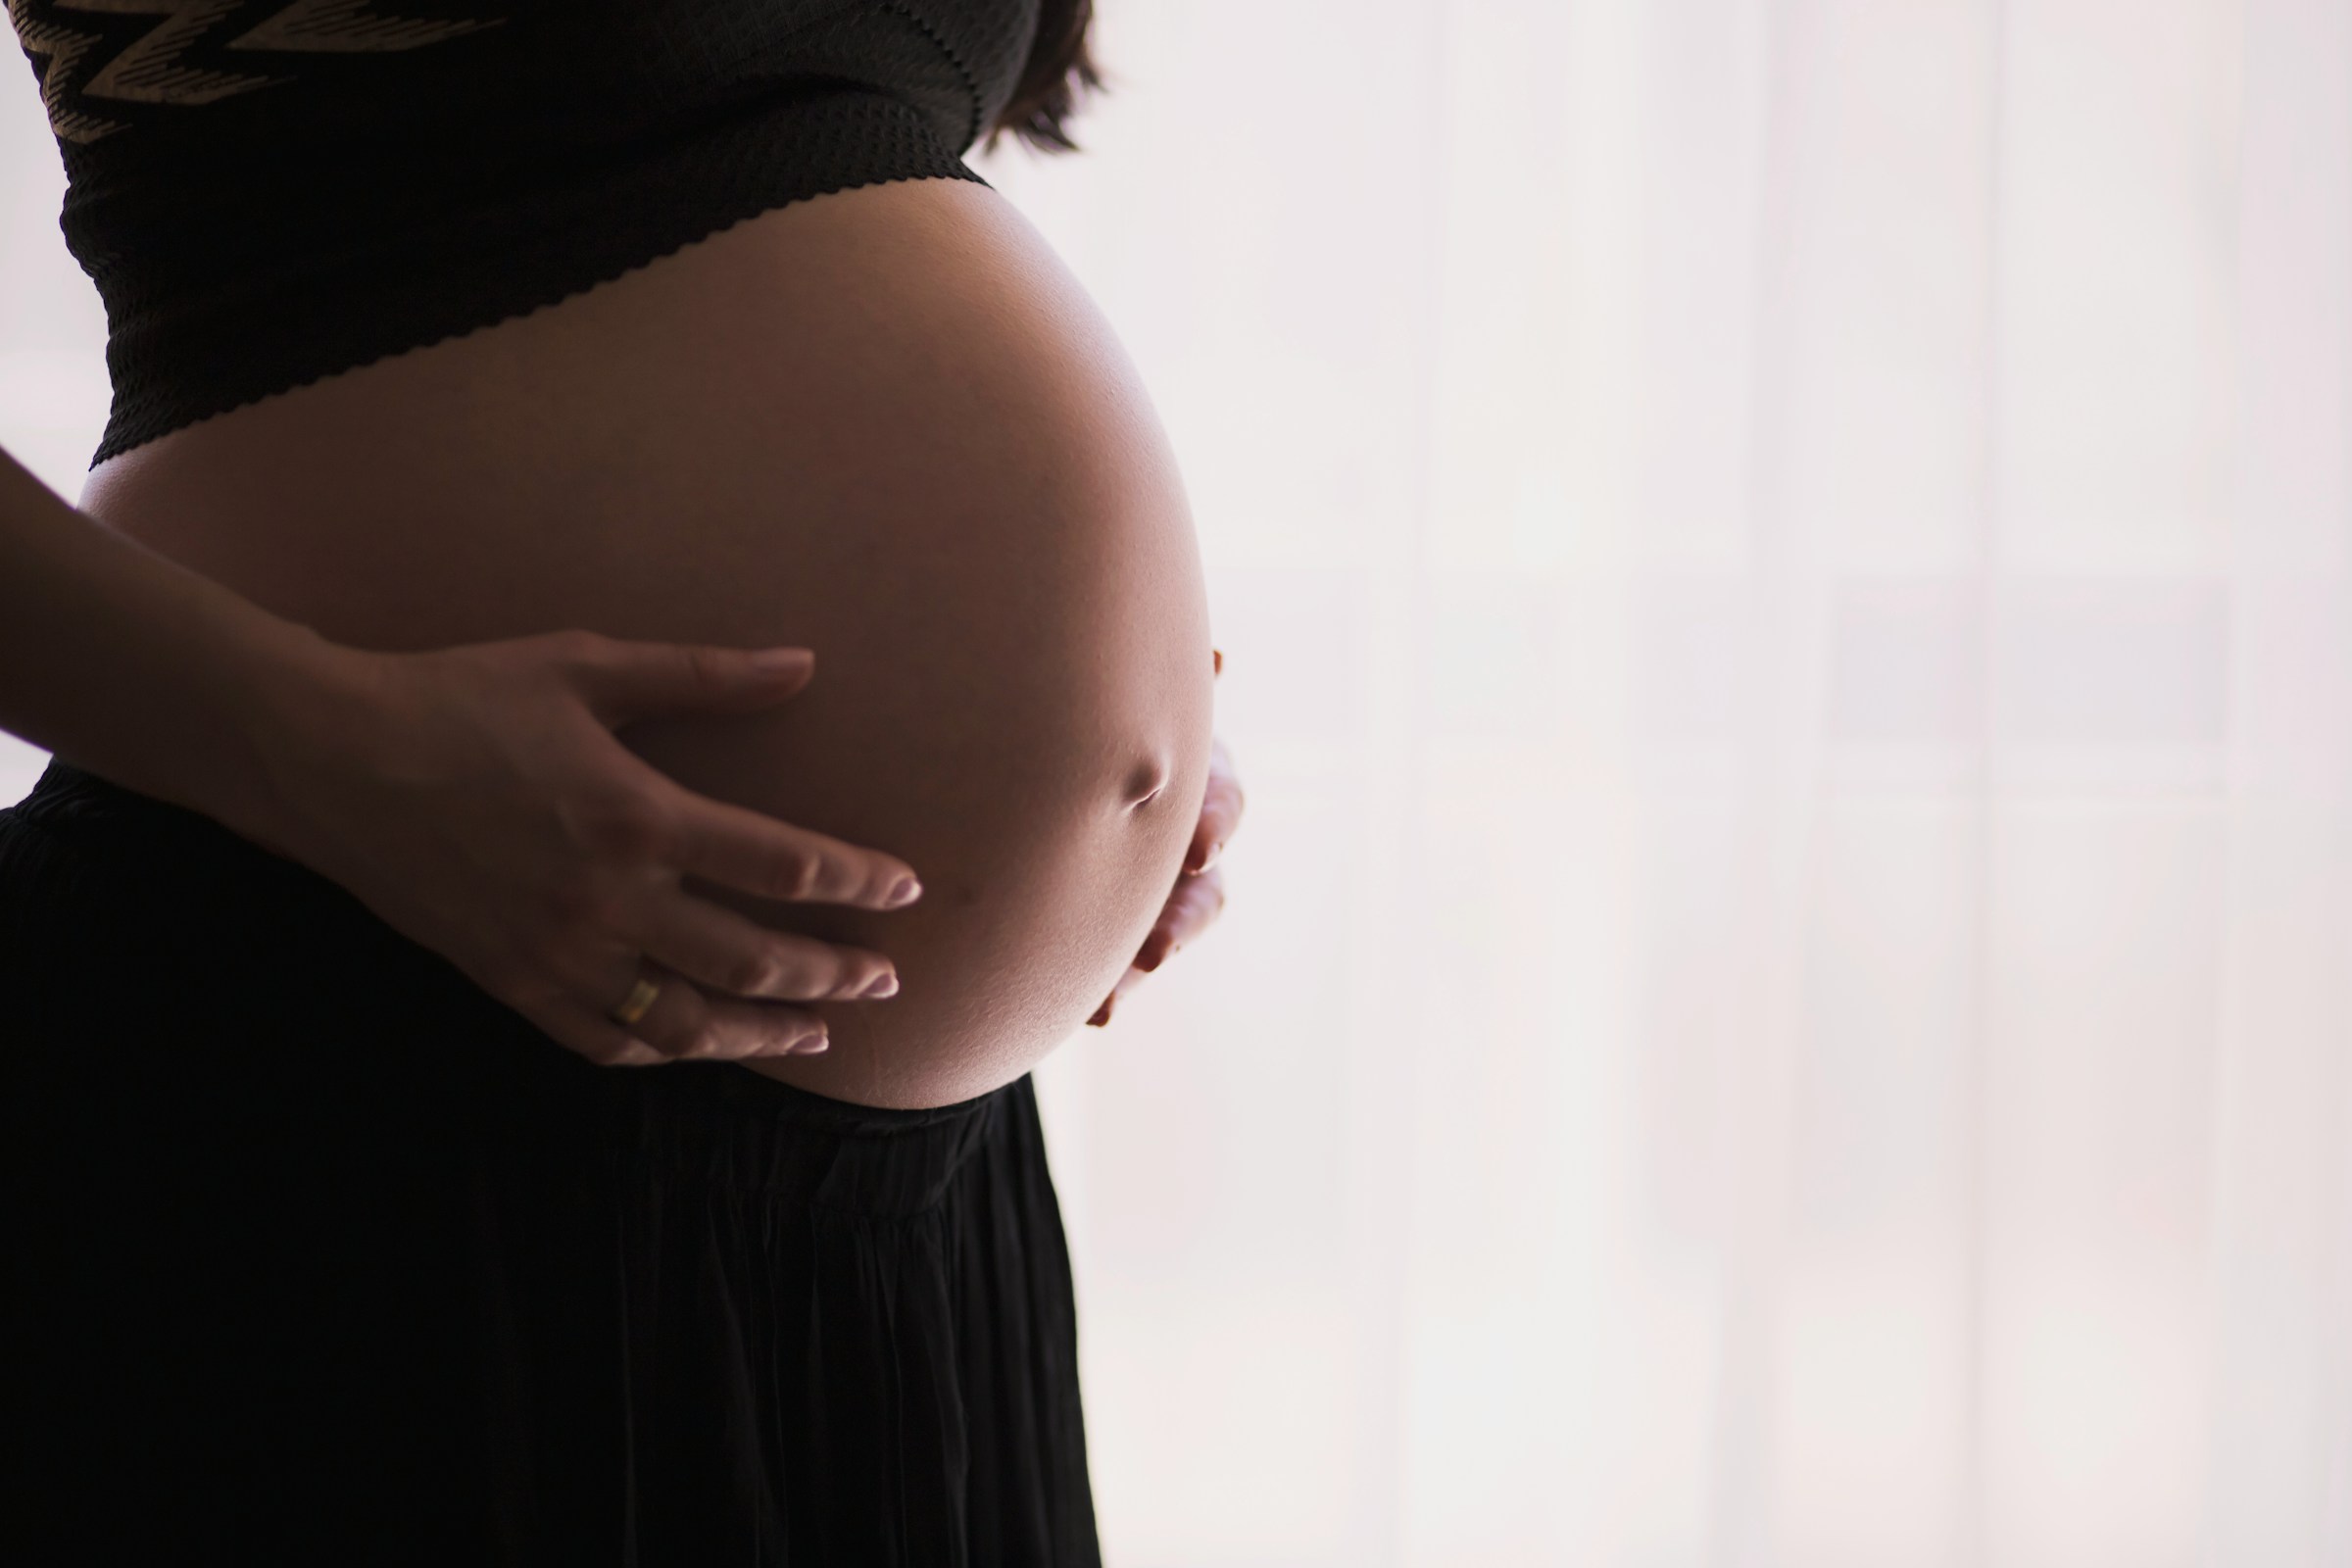 A woman holding a belly | Source: Unsplash